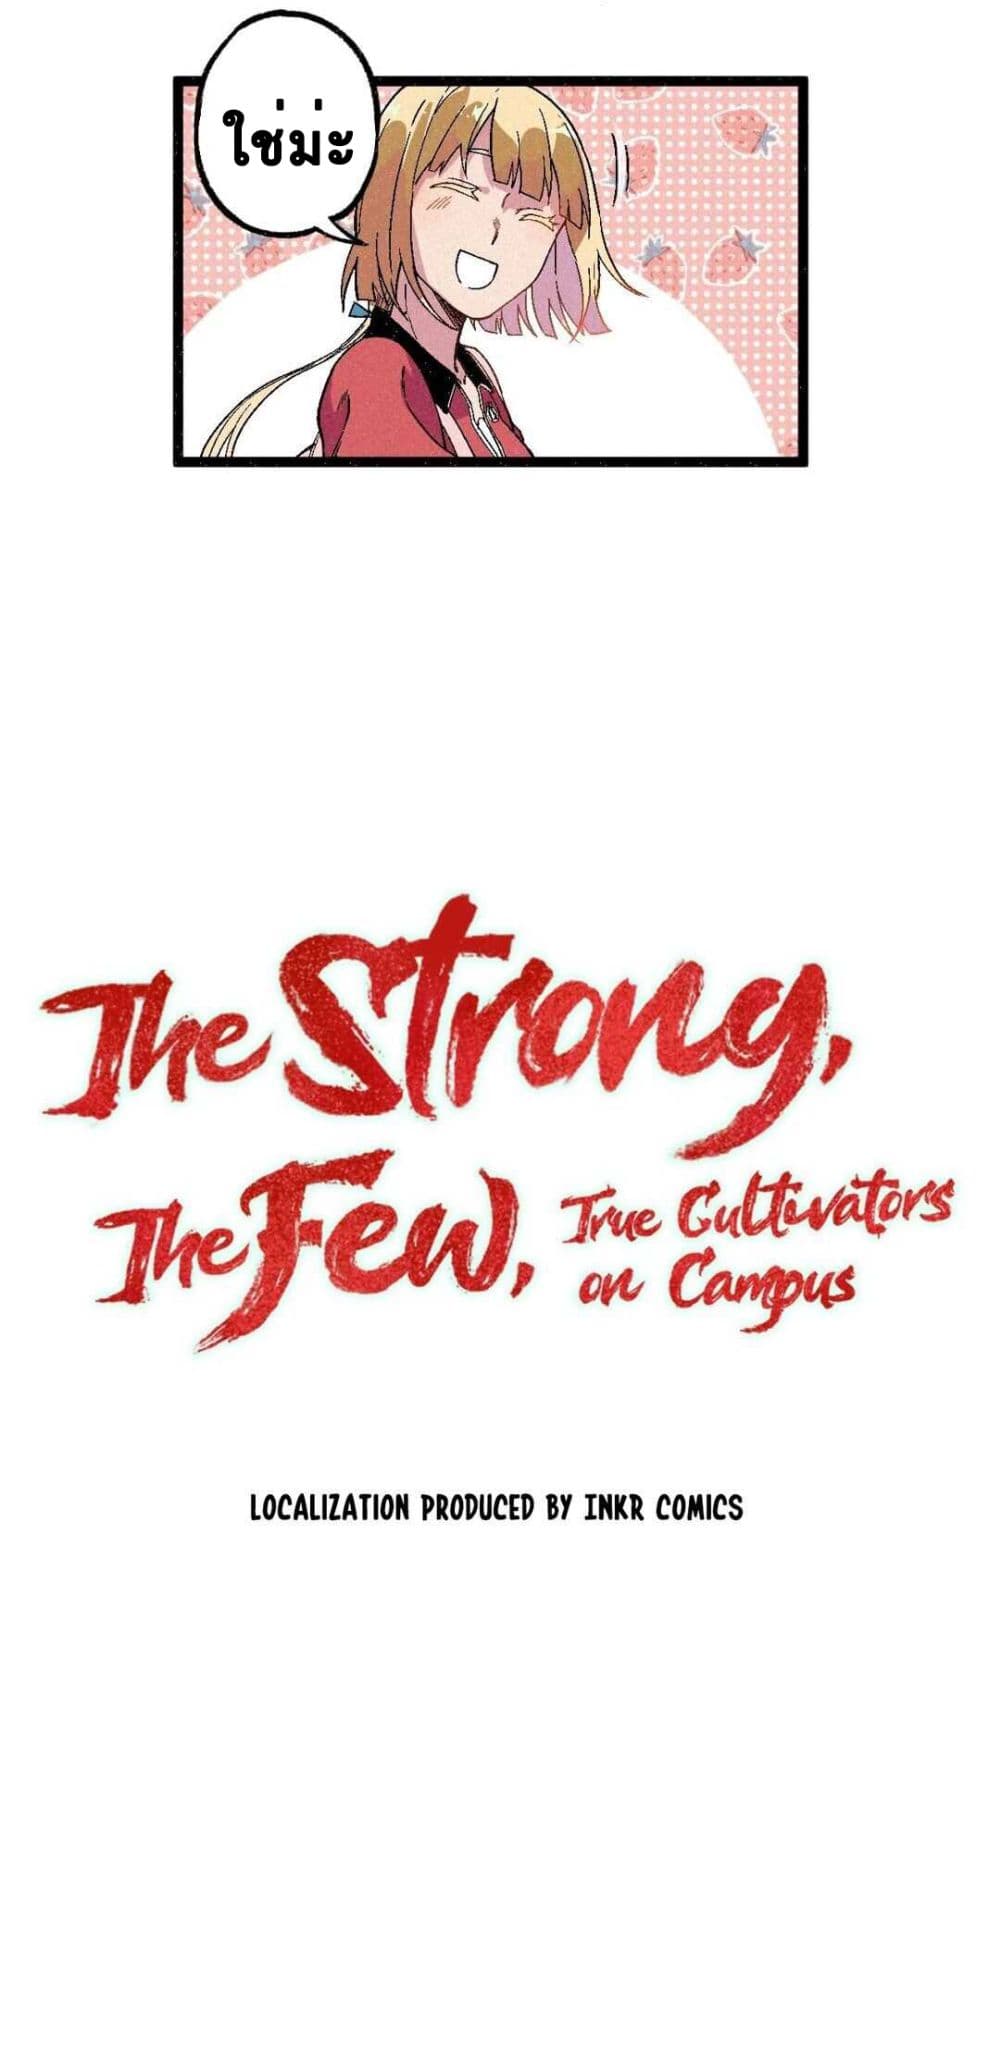 The Strong, The Few, True Cultivators on Campus 7 06